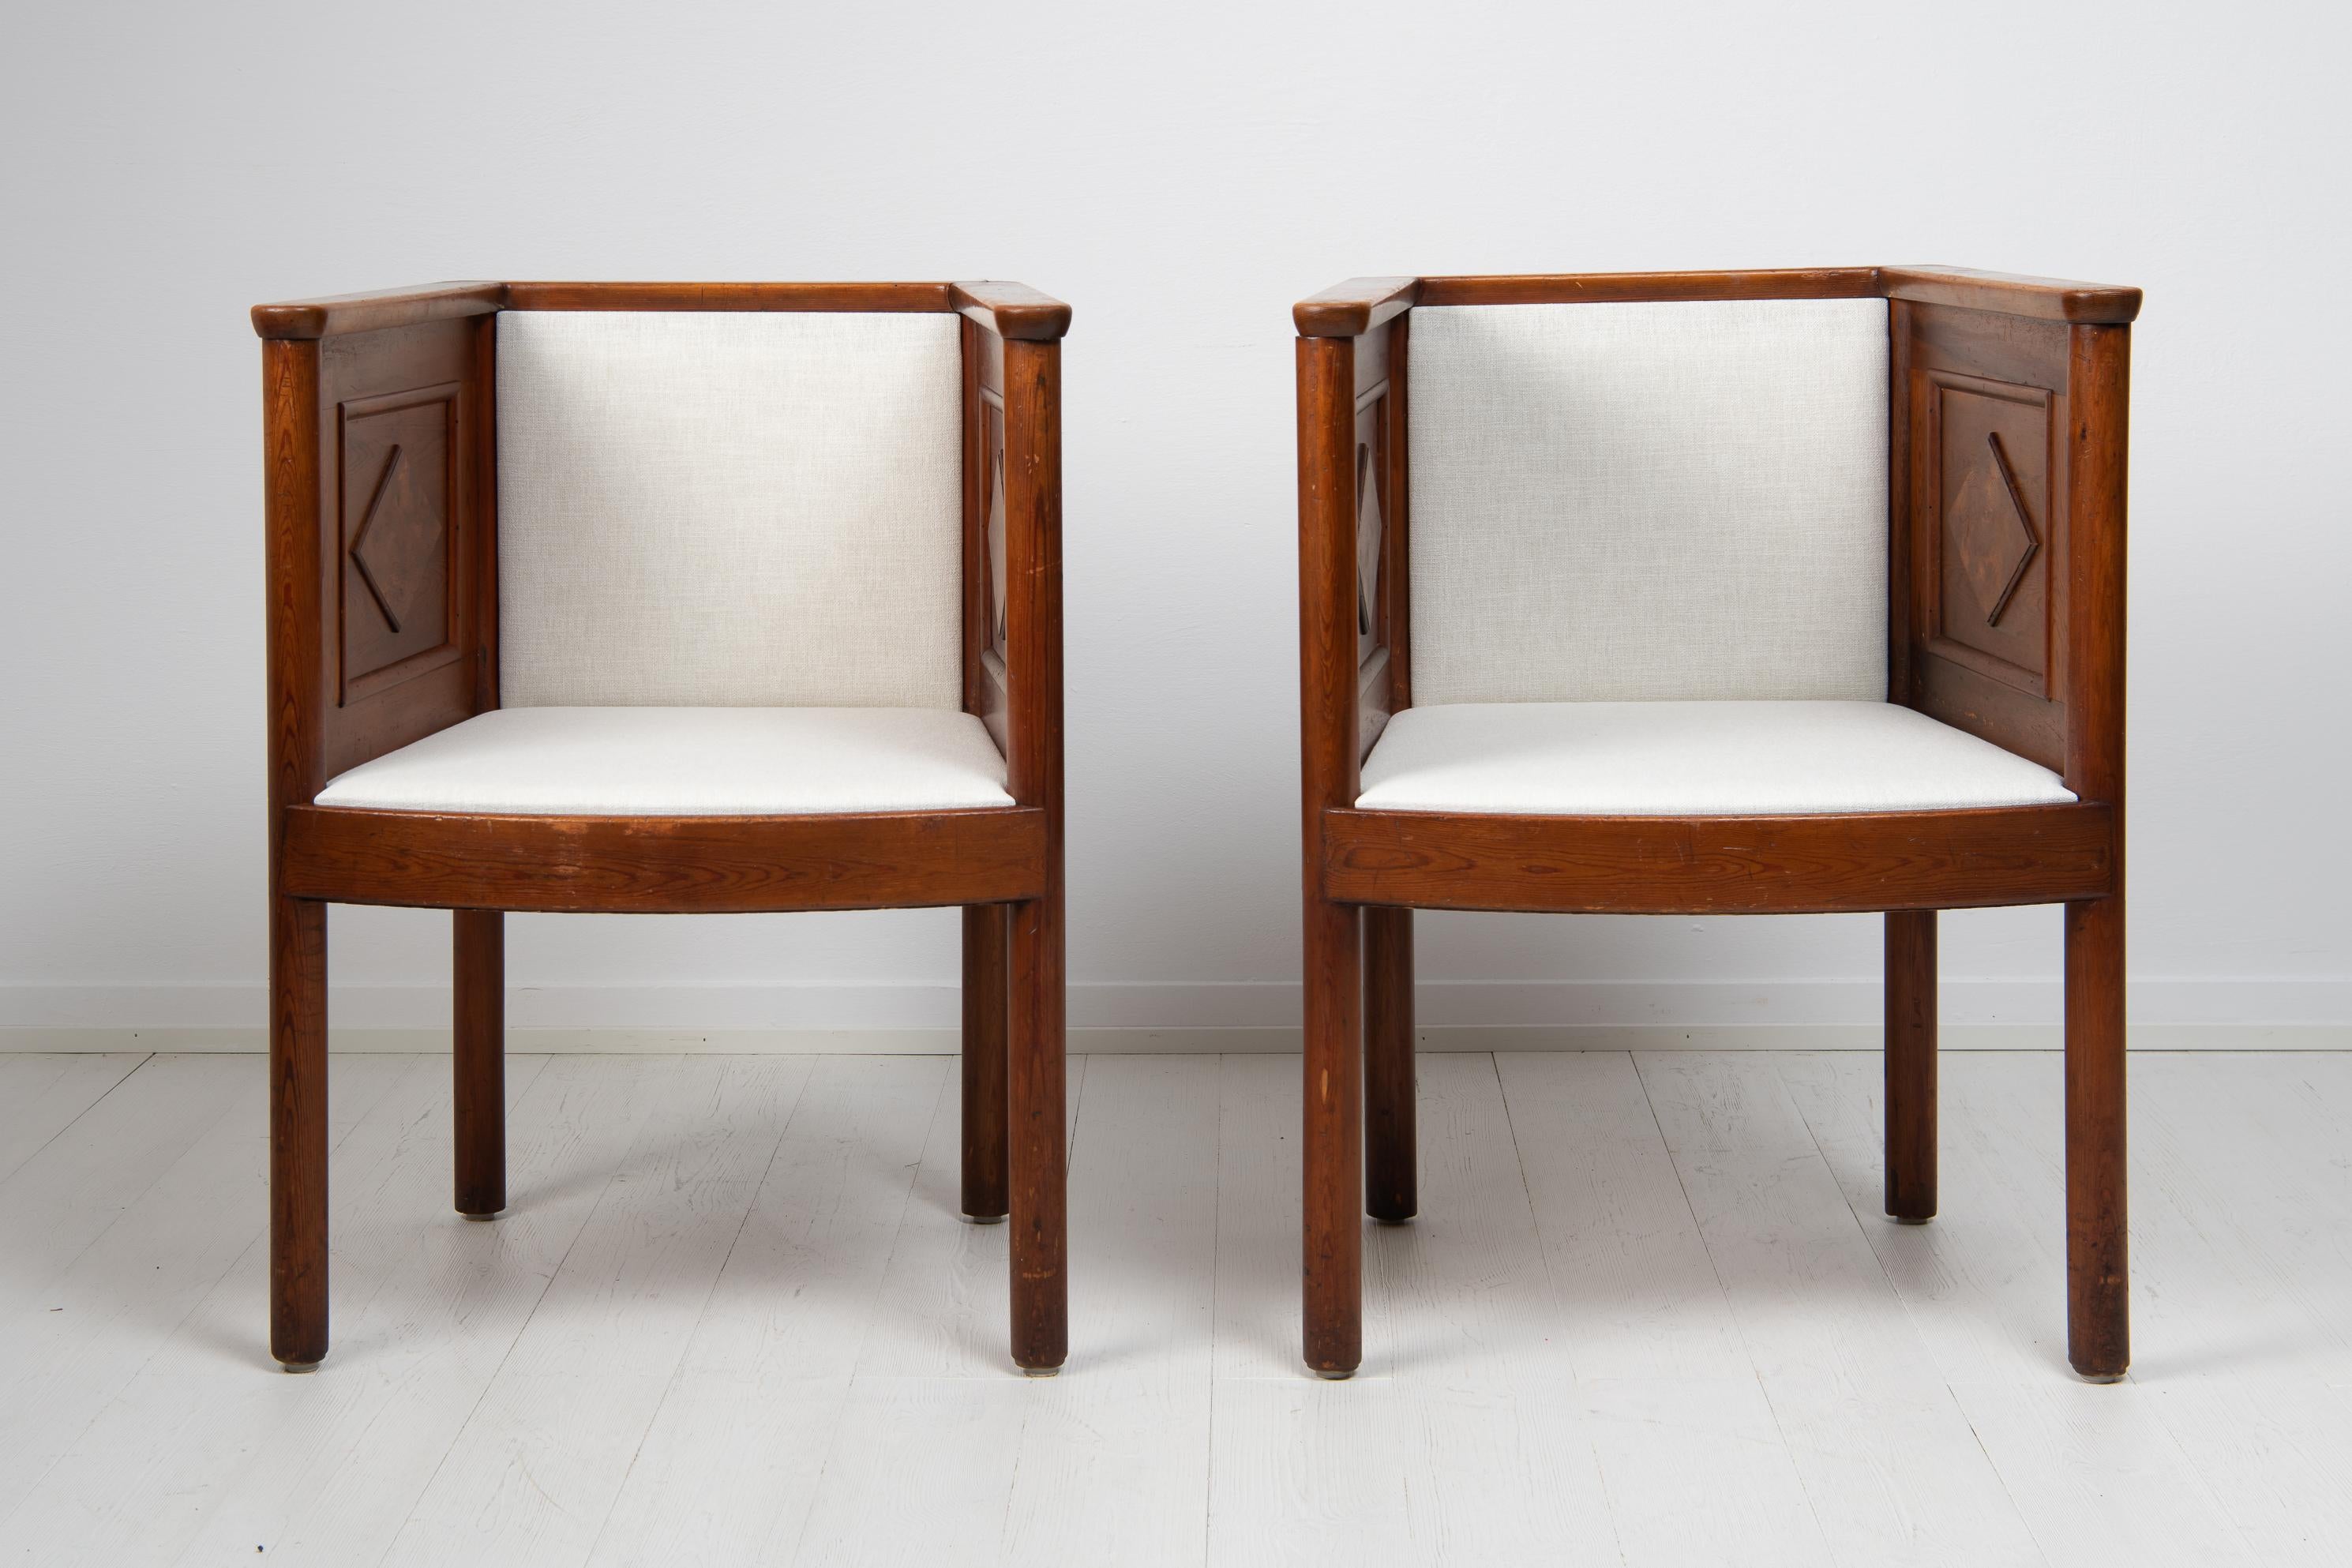 Swedish Pair of Armchairs in the Style of Axel Einar Hjorth